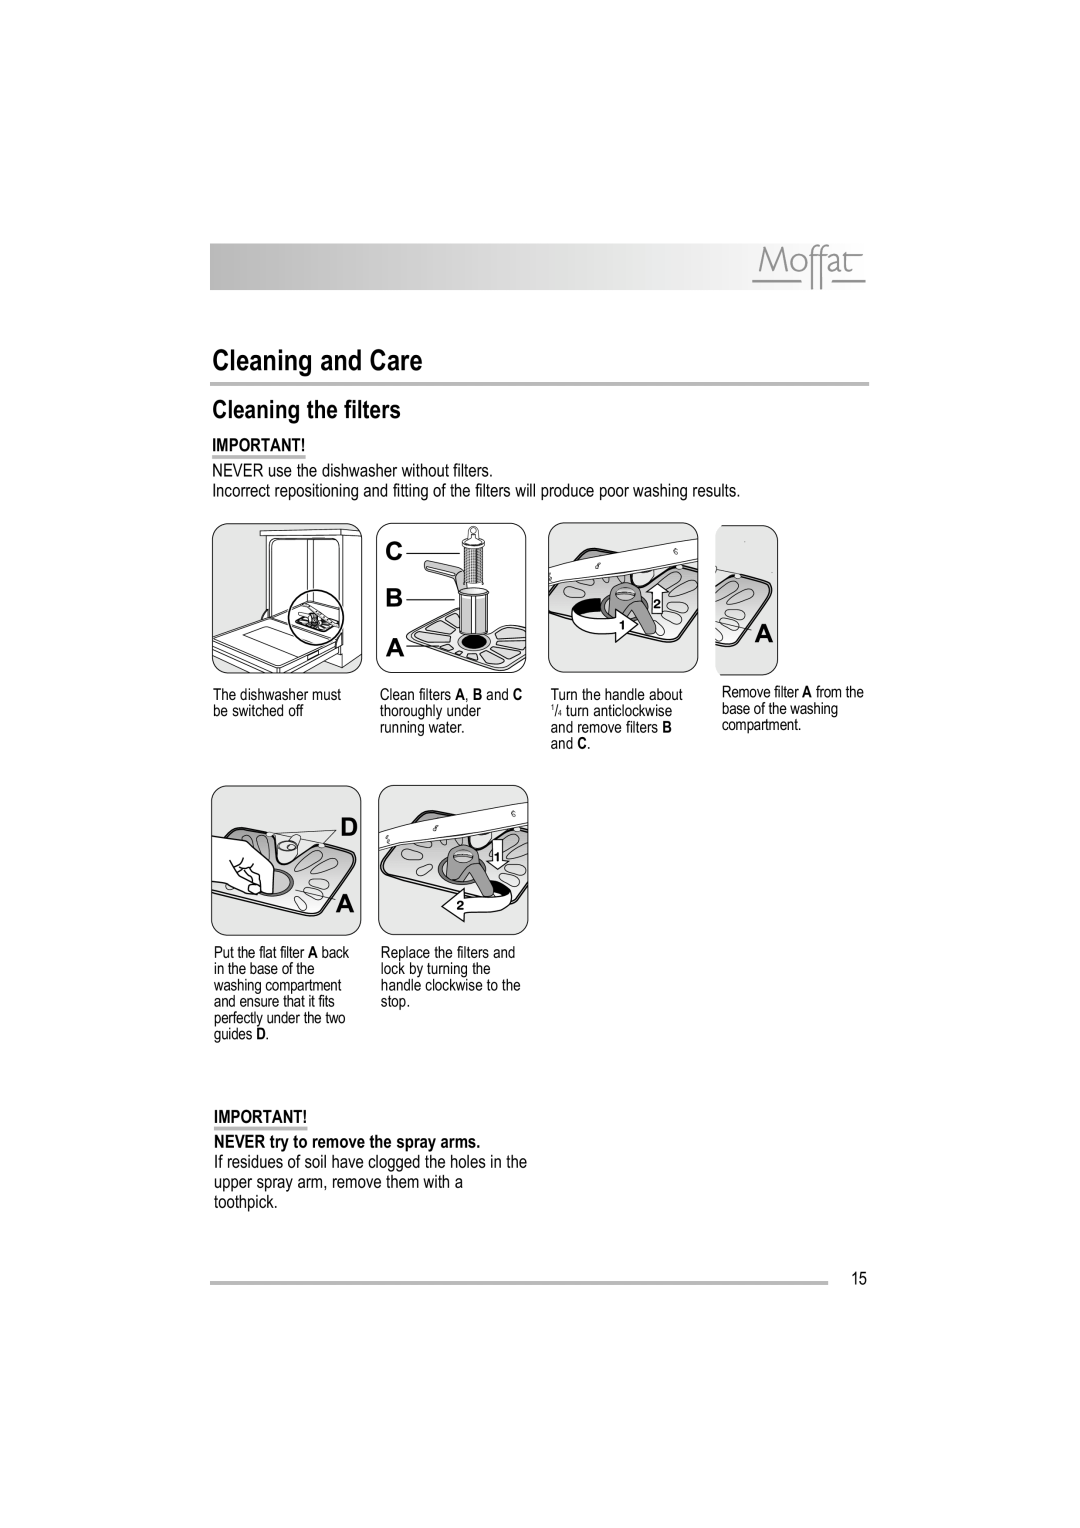 Moffat MDW 542 user manual Cleaning and Care, Cleaning the filters, NEVER try to remove the spray arms 